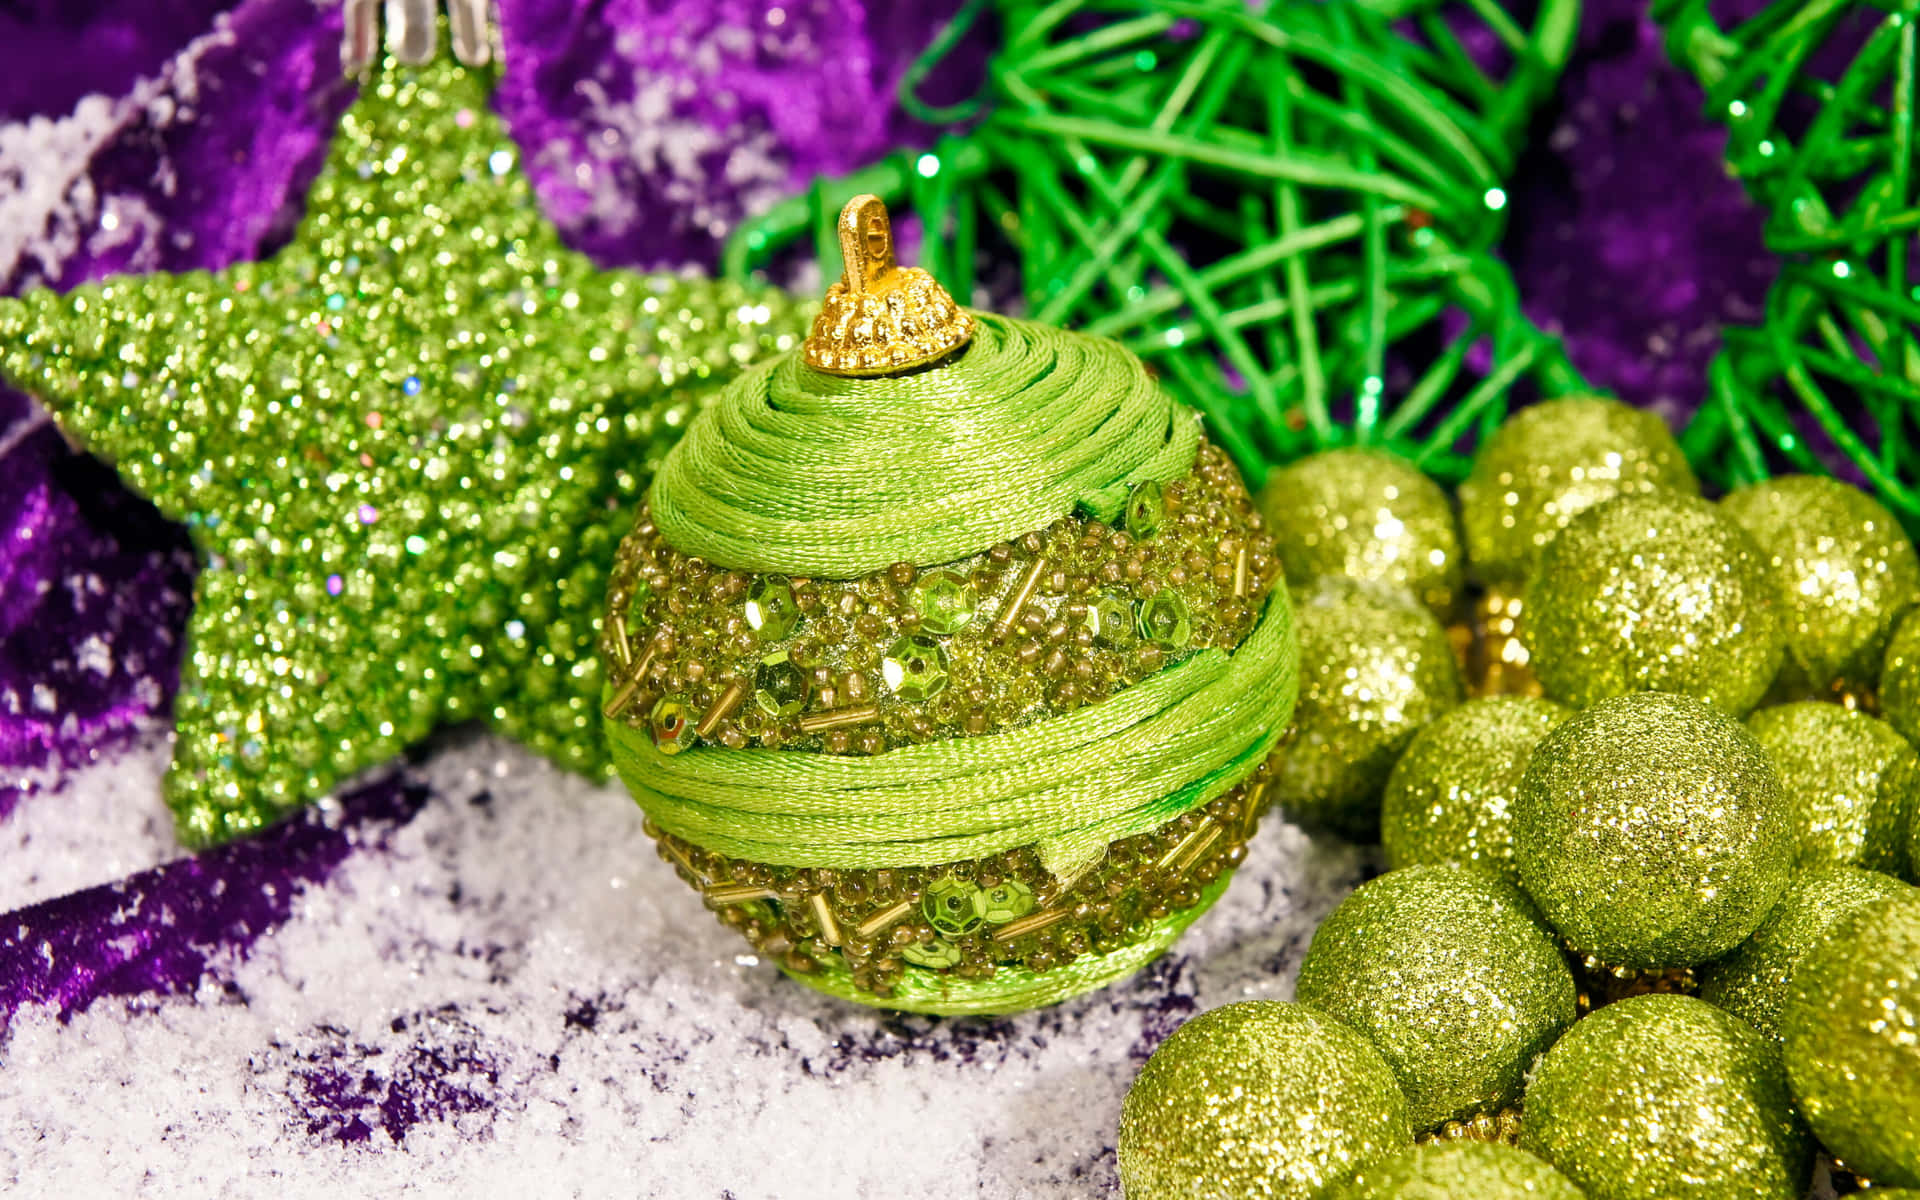 Christmas Ornaments And Decorations On A Purple And Green Background